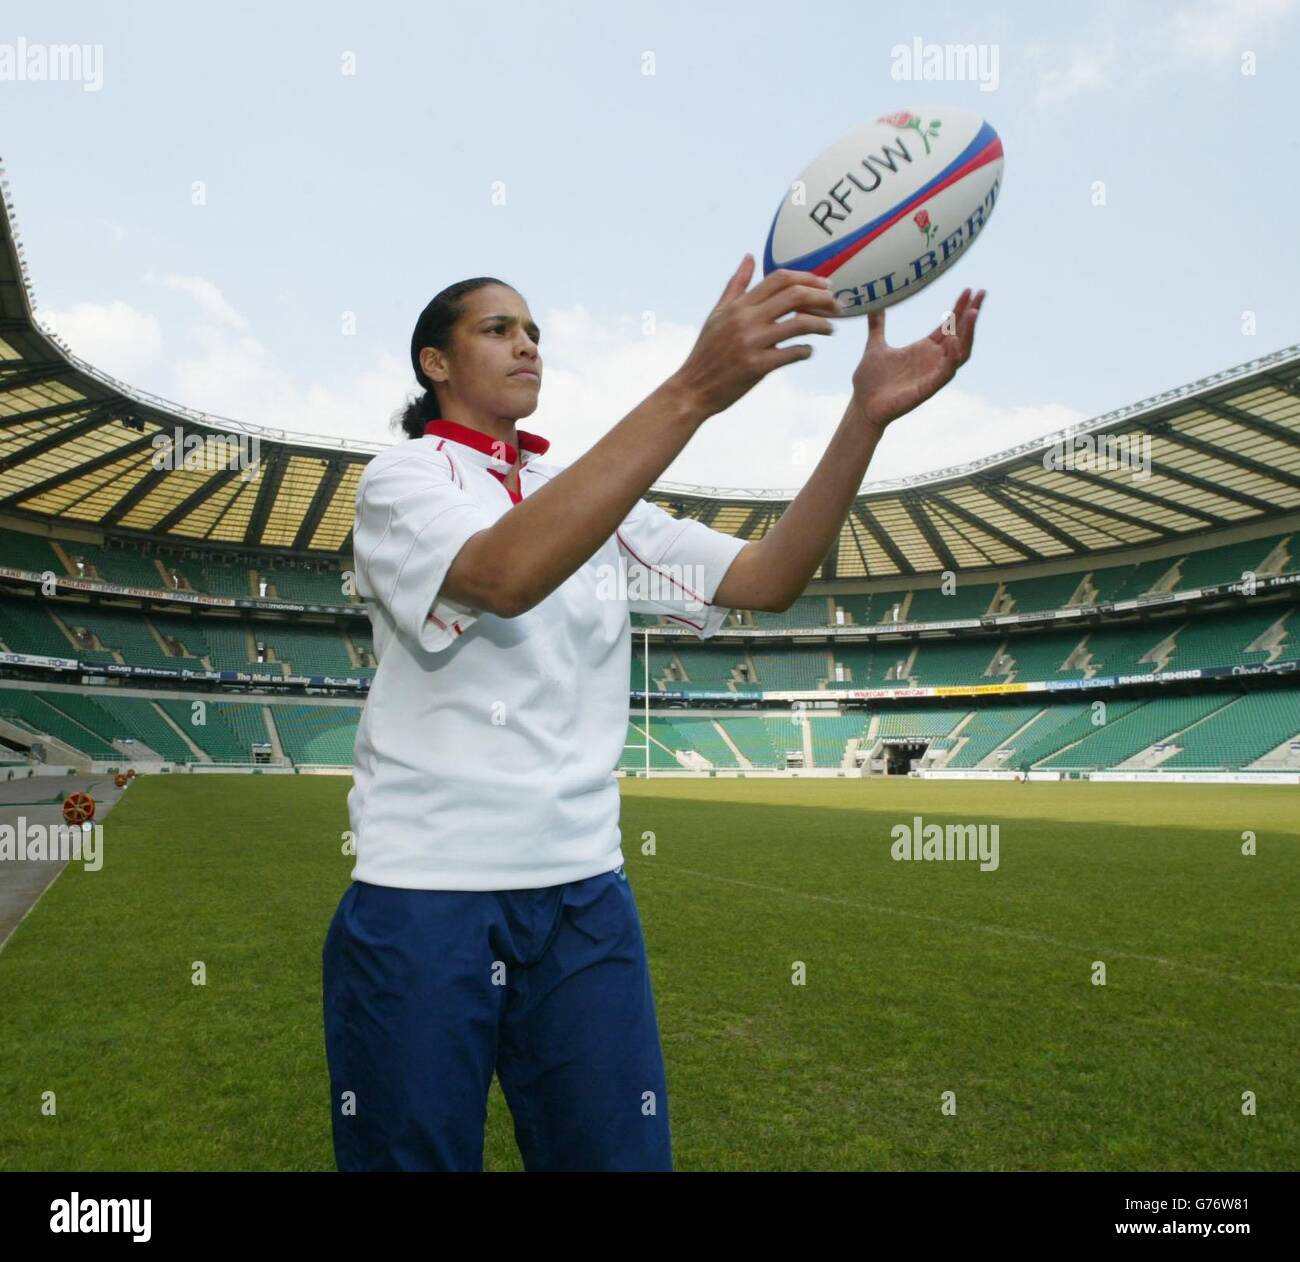 England Women's Rugby Team Captain Paula George, who will lead her side during the Women's Rugby World Cup in Spain. They go to the tournament being held in Barcelona seeded third, and according to some experts, have a real chance of clinching the title. *... after victory over New Zealand last summer. Their first game is against Italy. Stock Photo